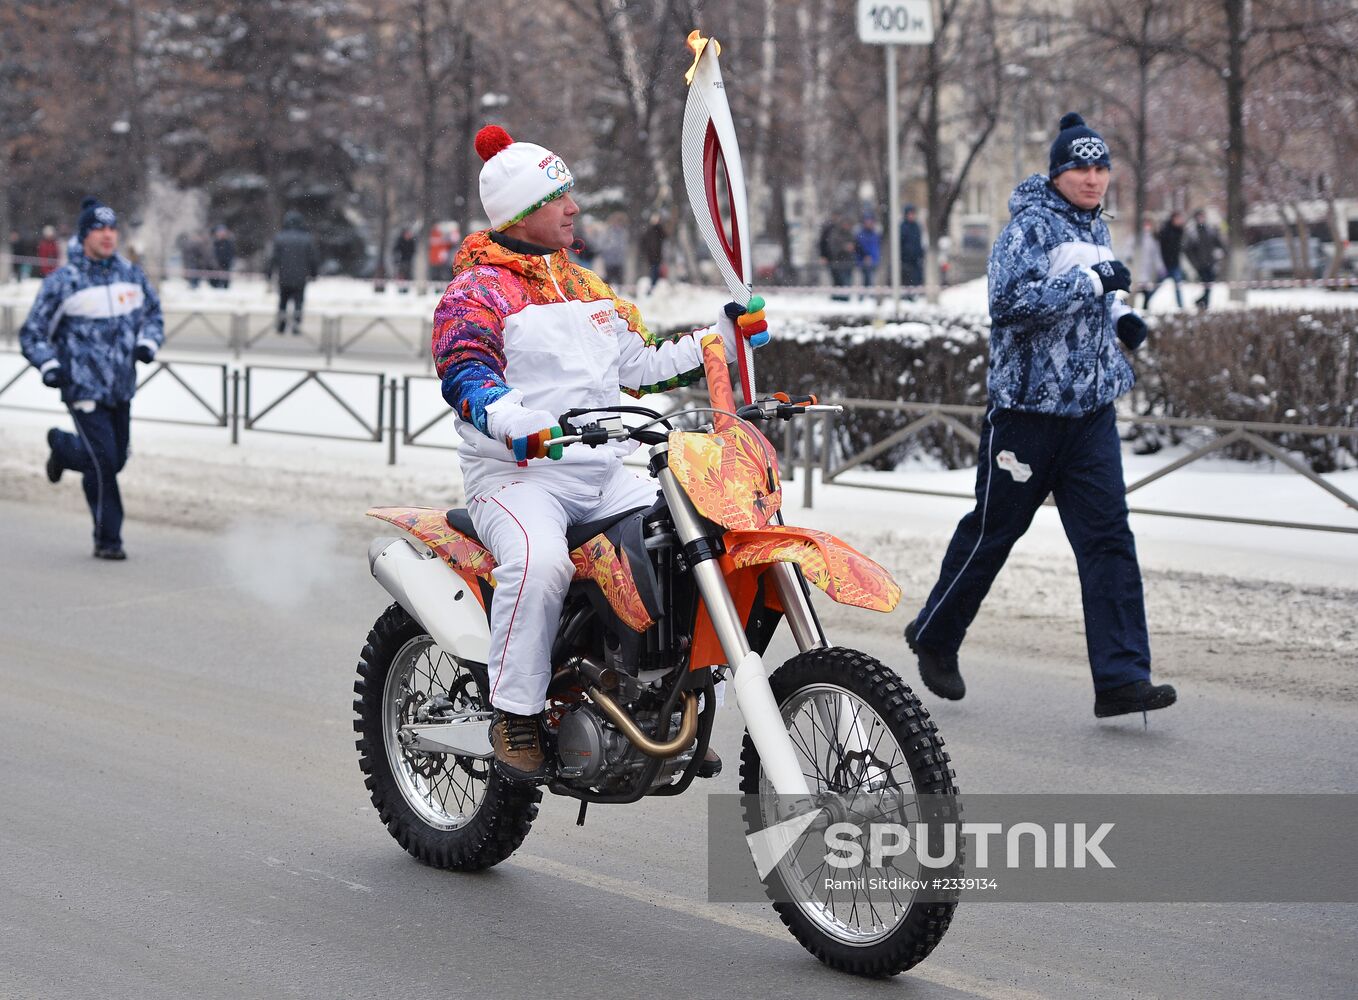 Olympic torch relay. Chelyabinsk. Day Two